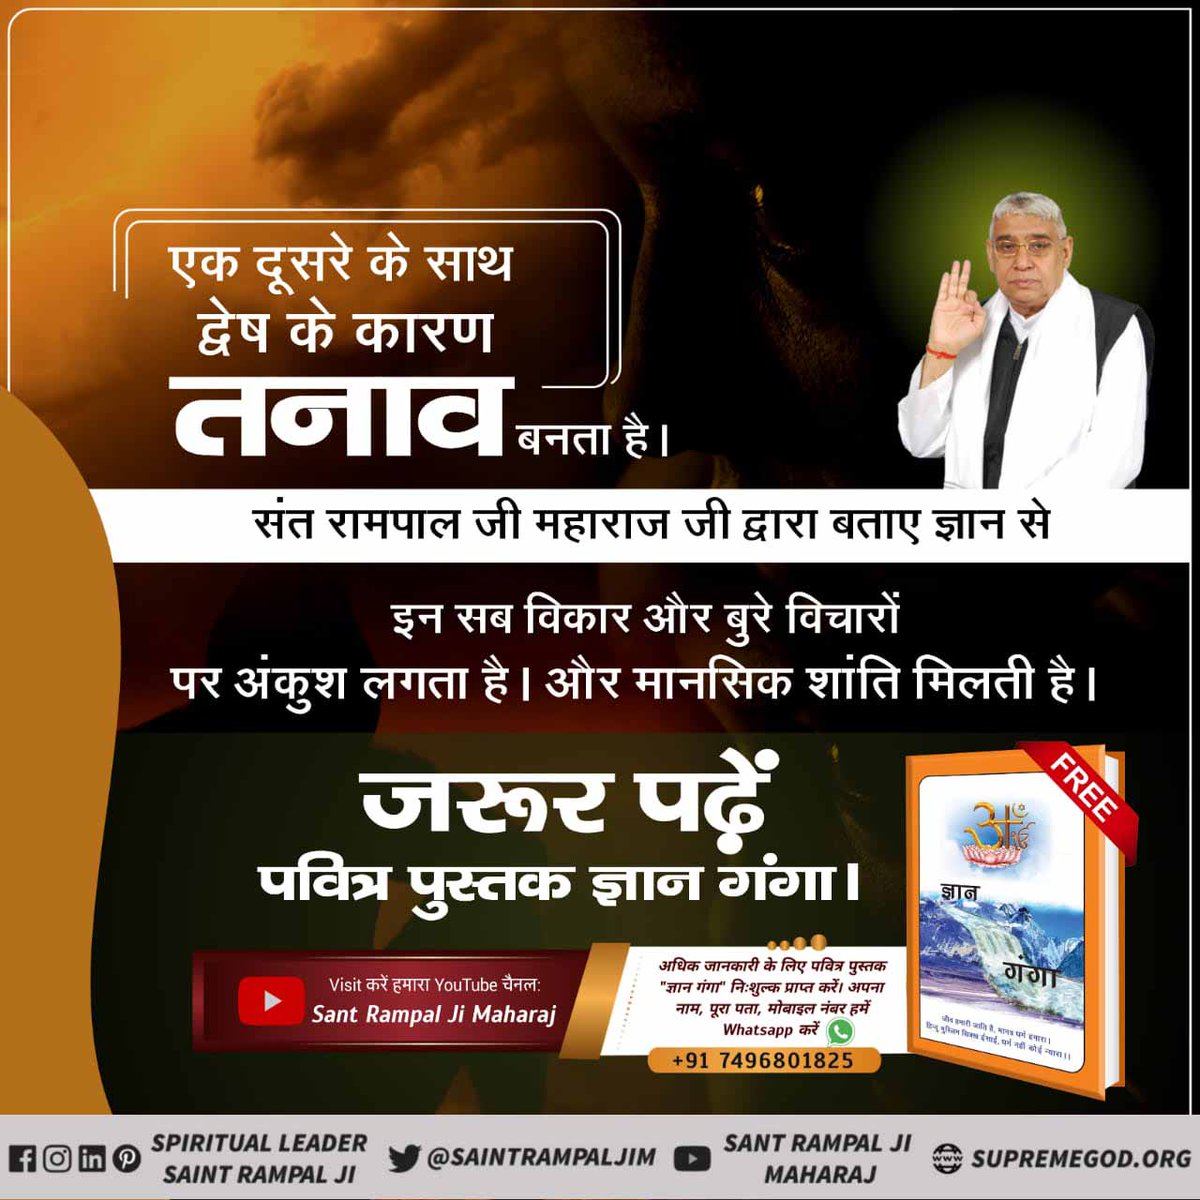 #मानसिक_शांति_नहींतो_कुछनहीं By reading and following the Book “Way of Living” you will be saved from sins. The unrest in the house will end. - Spiritual Leader Sant Rampal Ji Maharaj